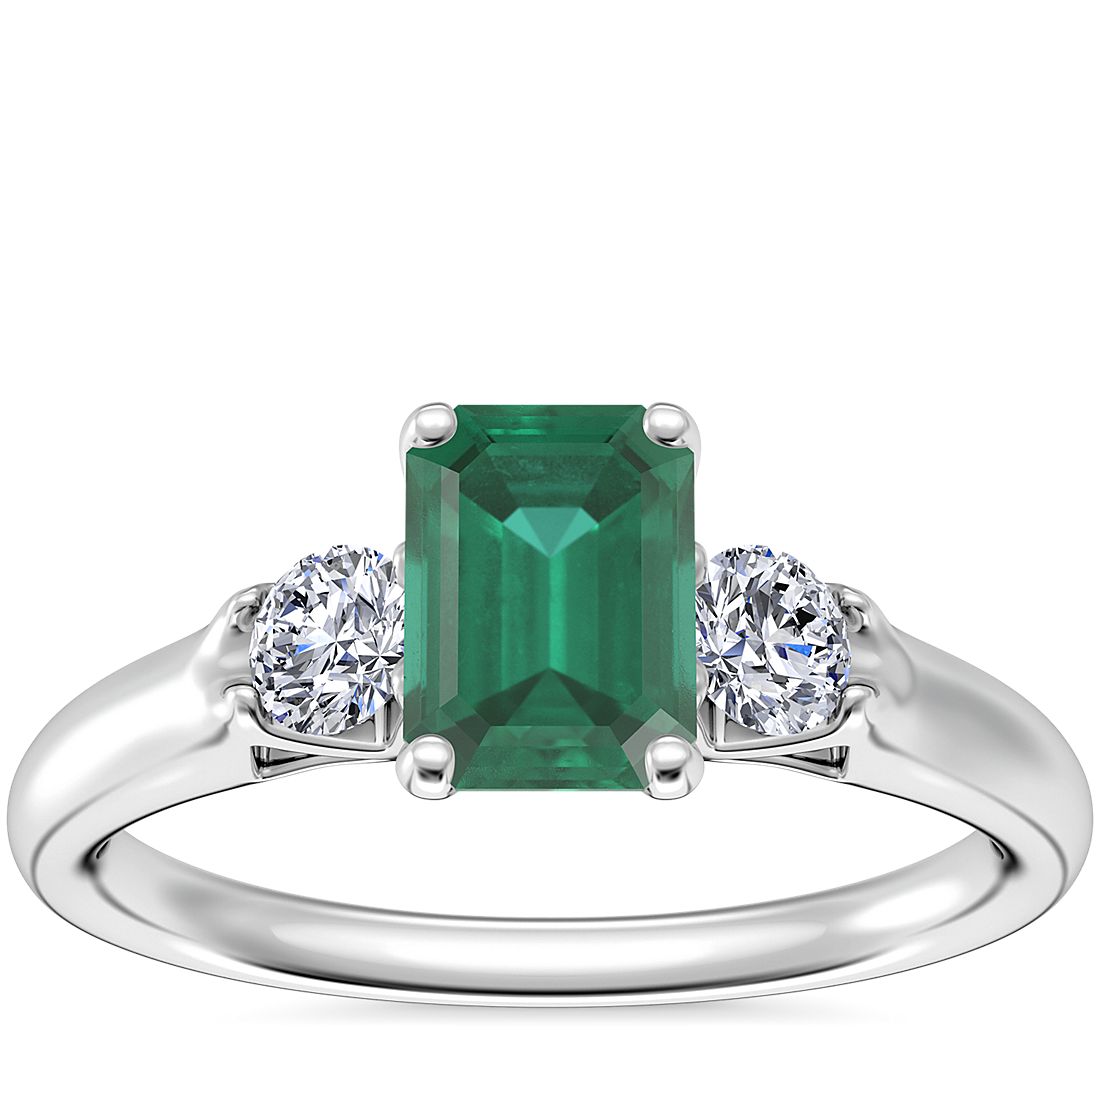 Classic Three Stone Engagement Ring with Emerald-Cut Emerald in 14k White Gold (7x5mm)